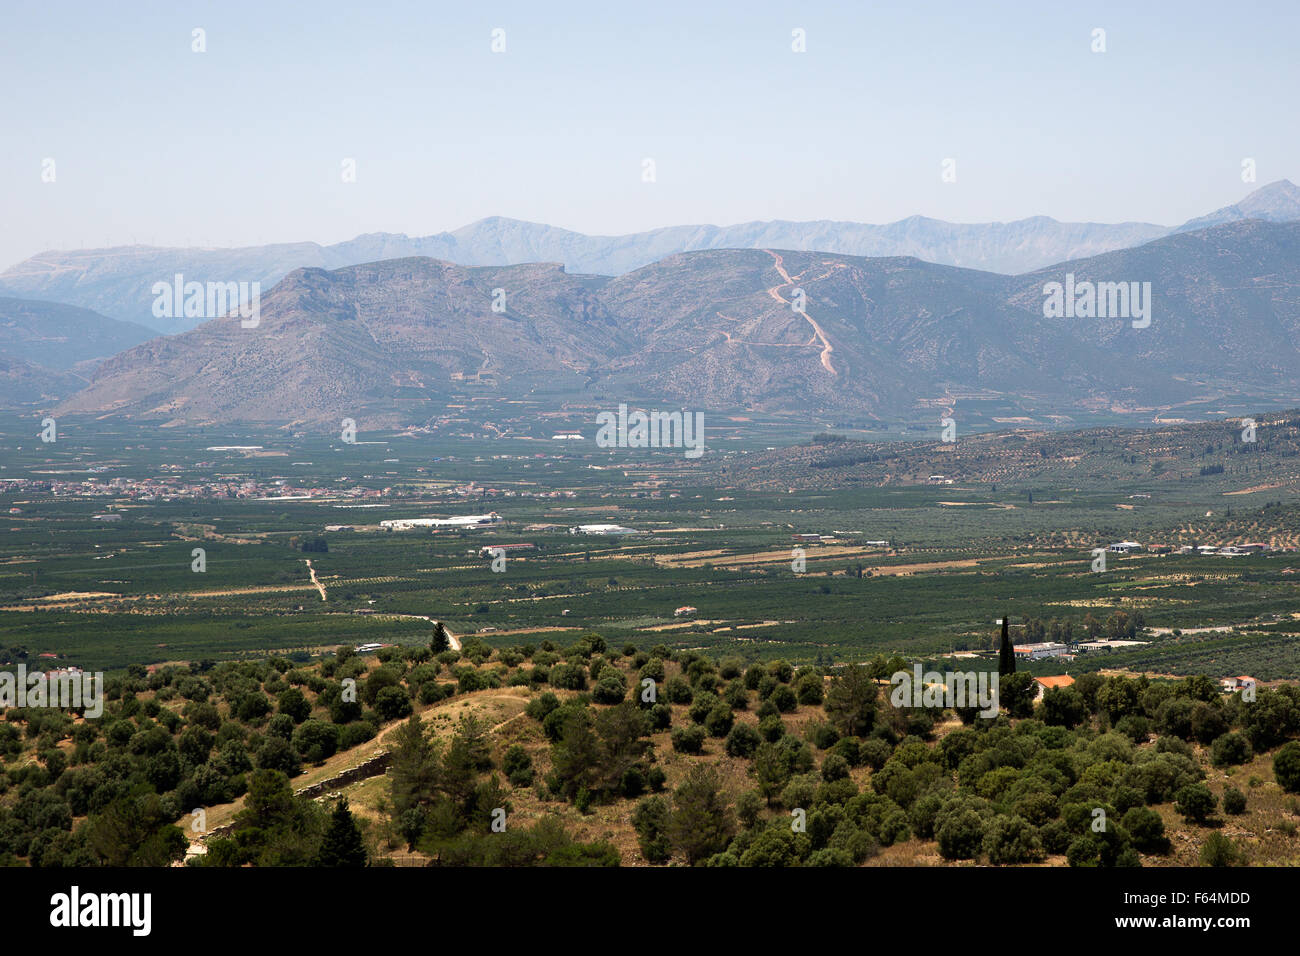 The mountains across the valley from historic site of Mycenae, Greece which is said to be the profile of Agamemnon sleeping. Stock Photo